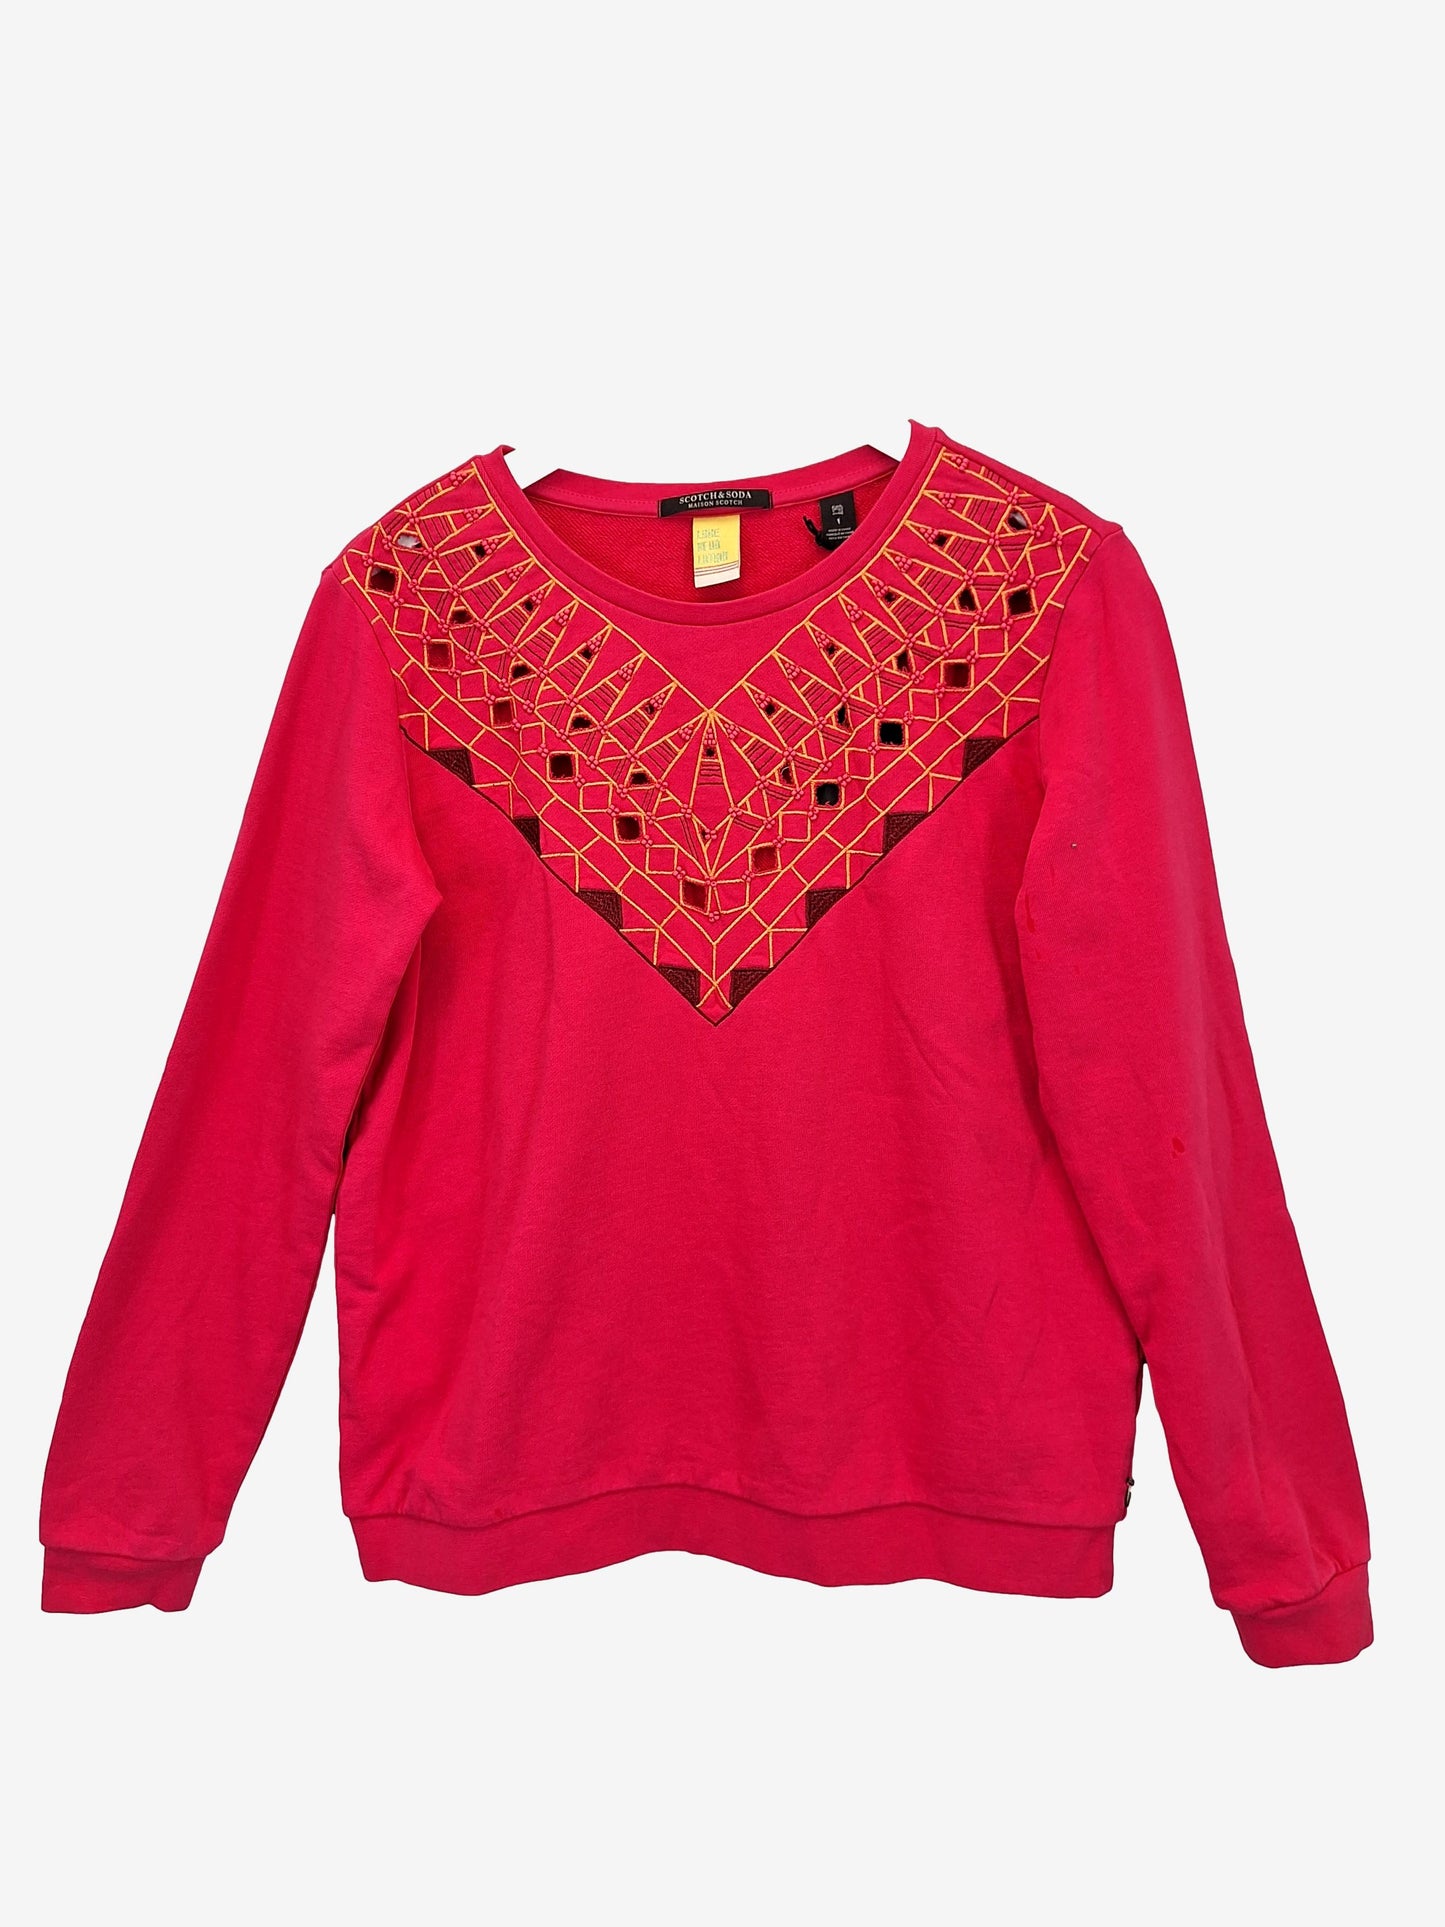 Scotch & Soda Fuchsia Beaded Jumper Size 8 by SwapUp-Online Second Hand Store-Online Thrift Store